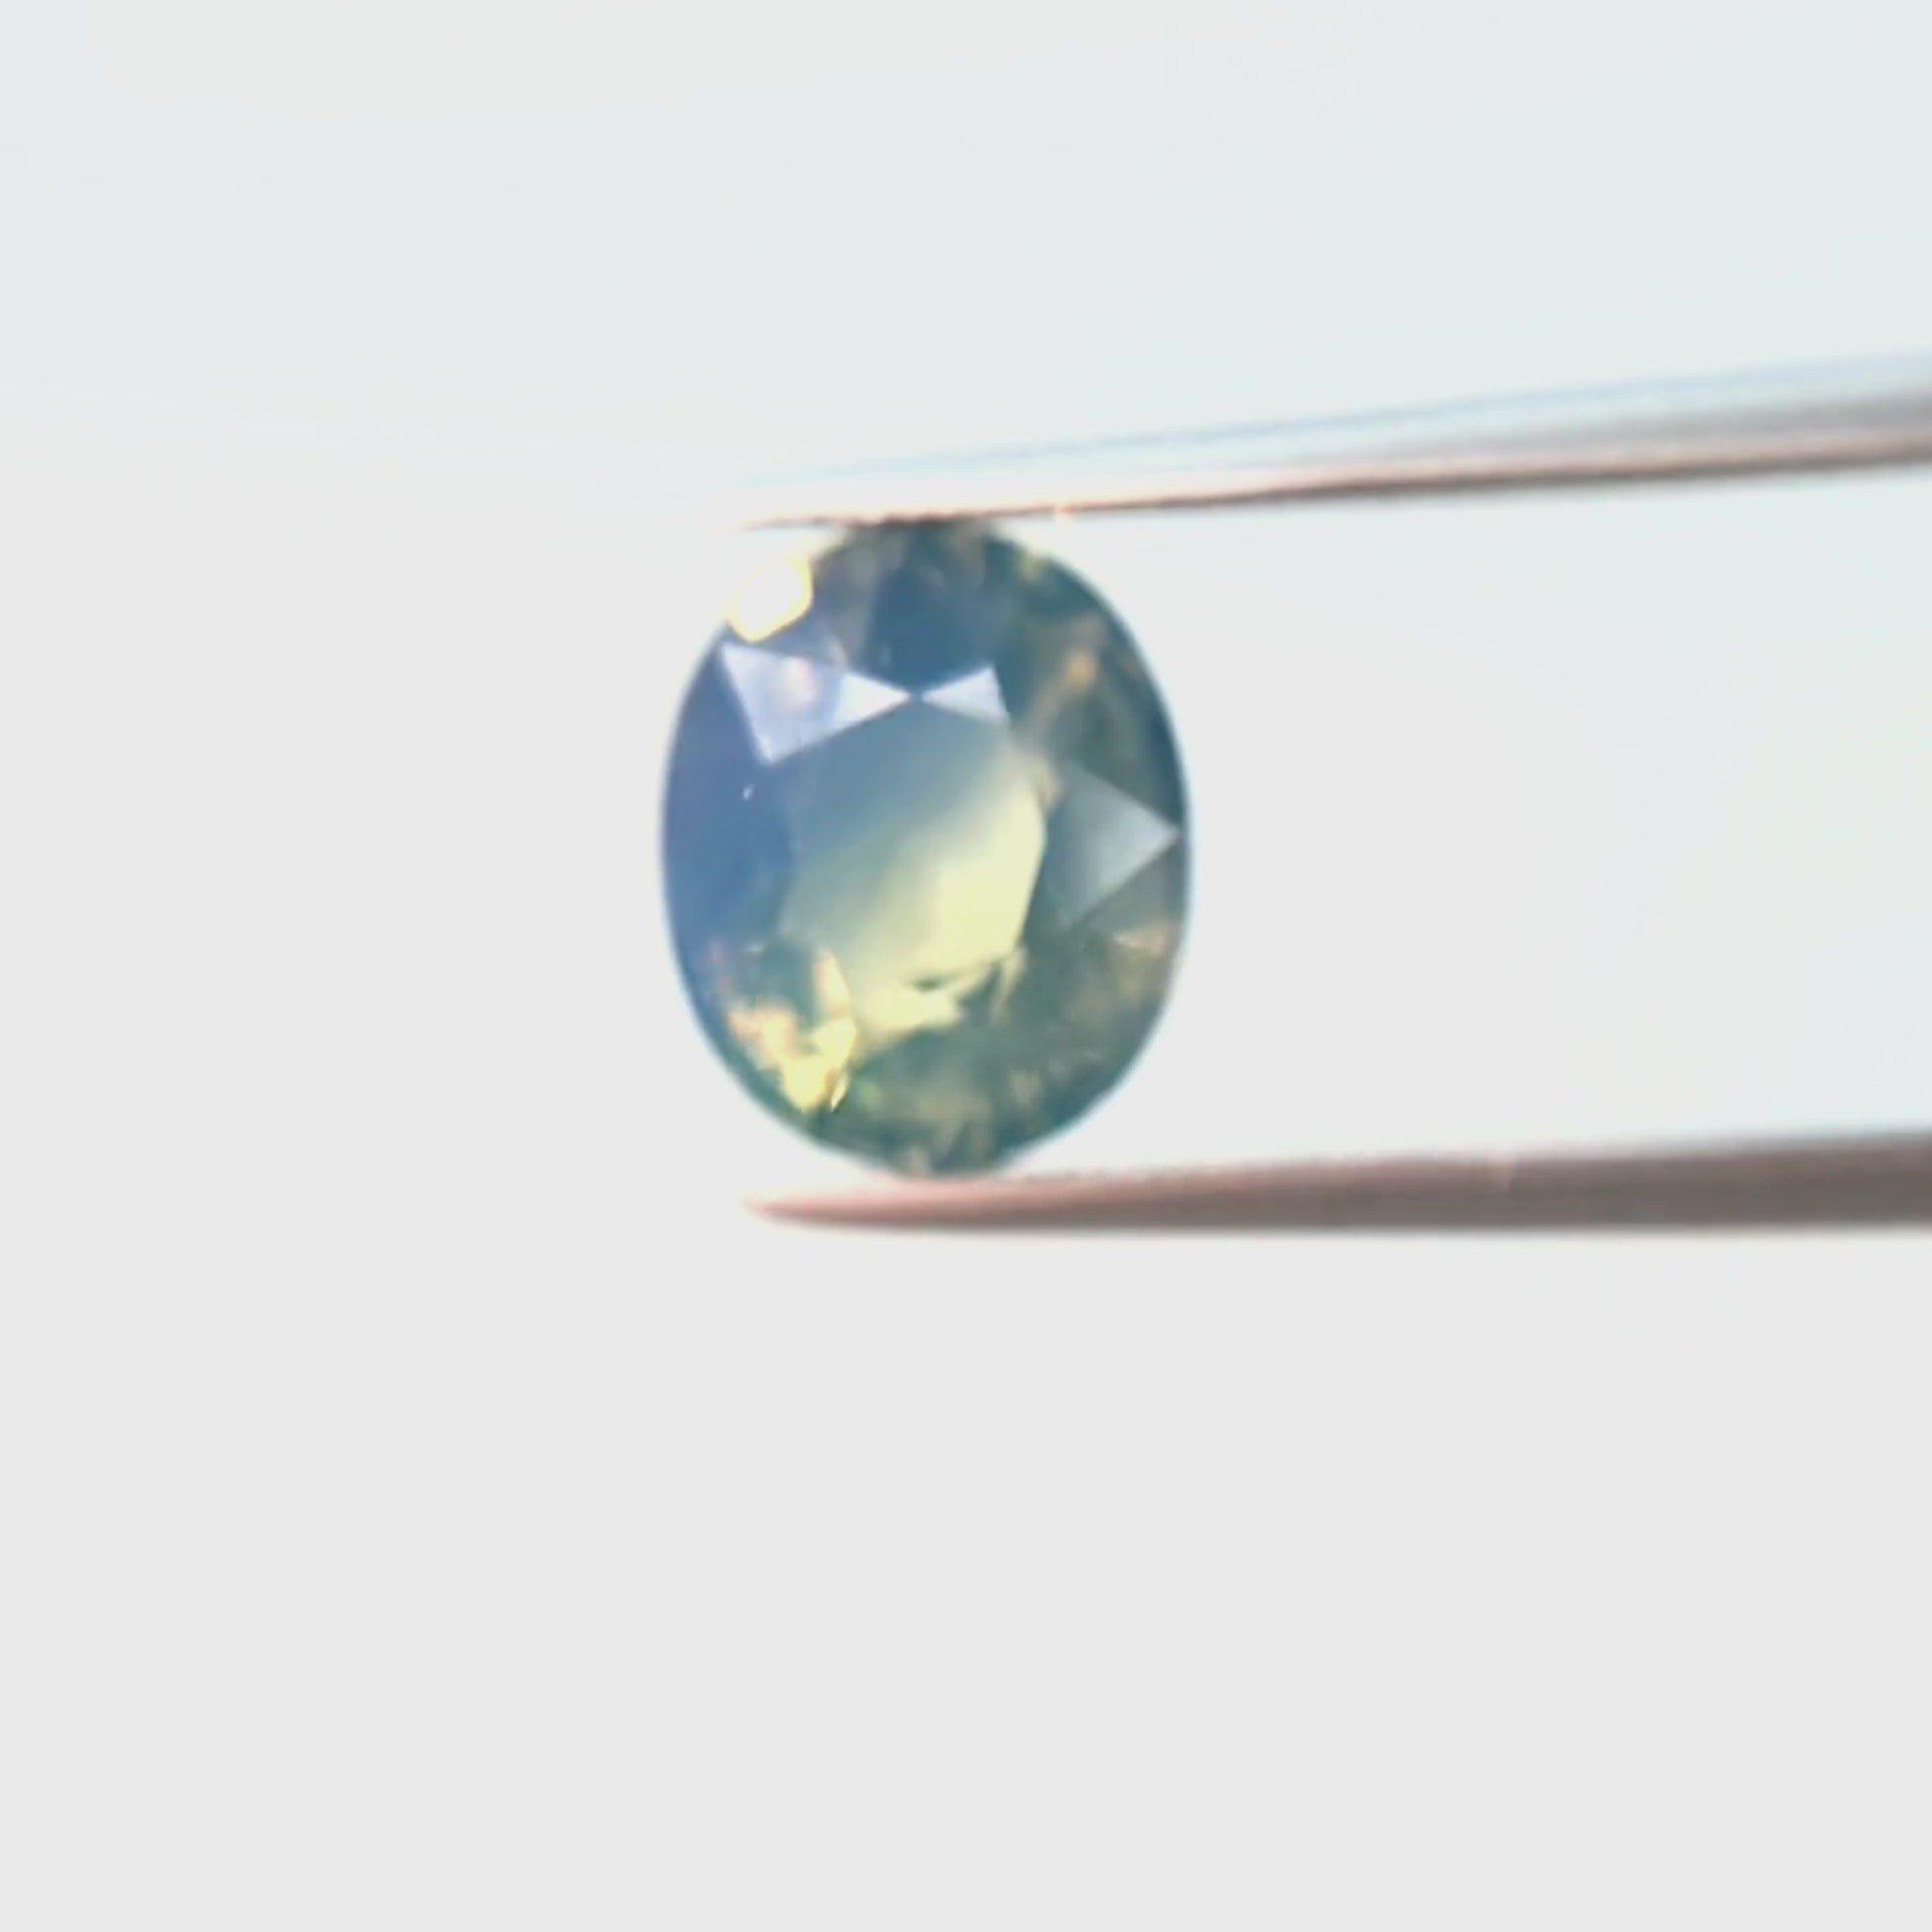 3.05 Carat Multicolor Green, Blue and Yellow Opalescent Oval Sapphire for Custom Work - Inventory Code MCOS305